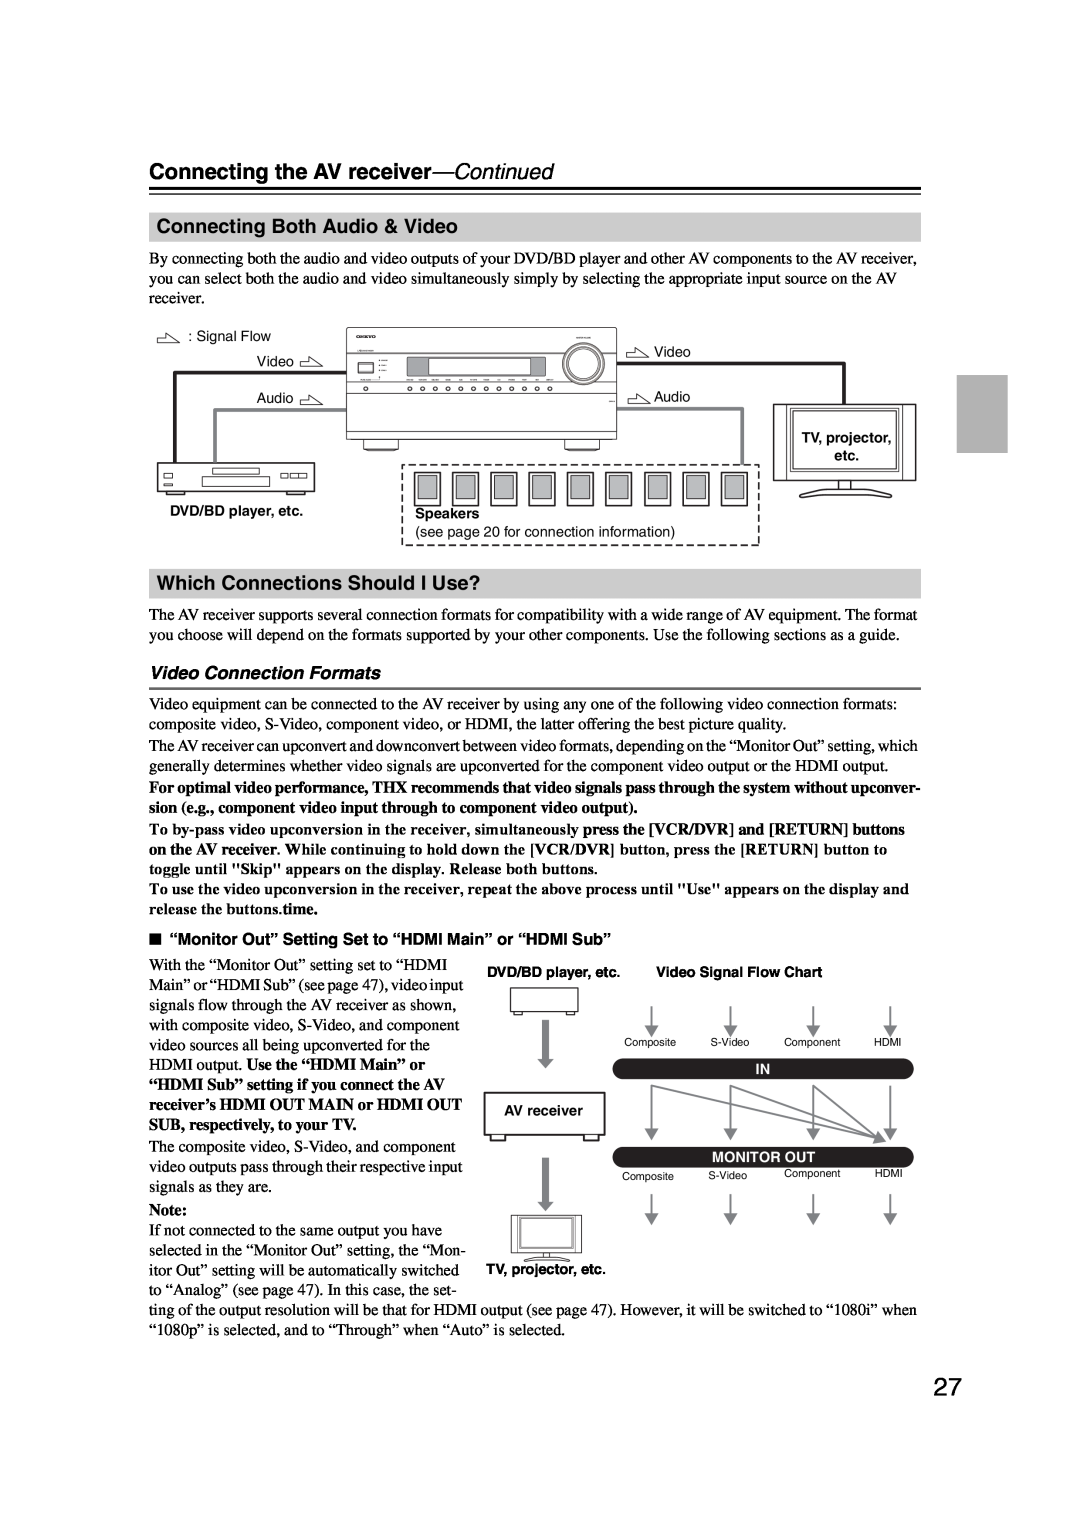 Onkyo TX-NR1007 instruction manual Connecting Both Audio & Video, Which Connections Should I Use?, Video Connection Formats 